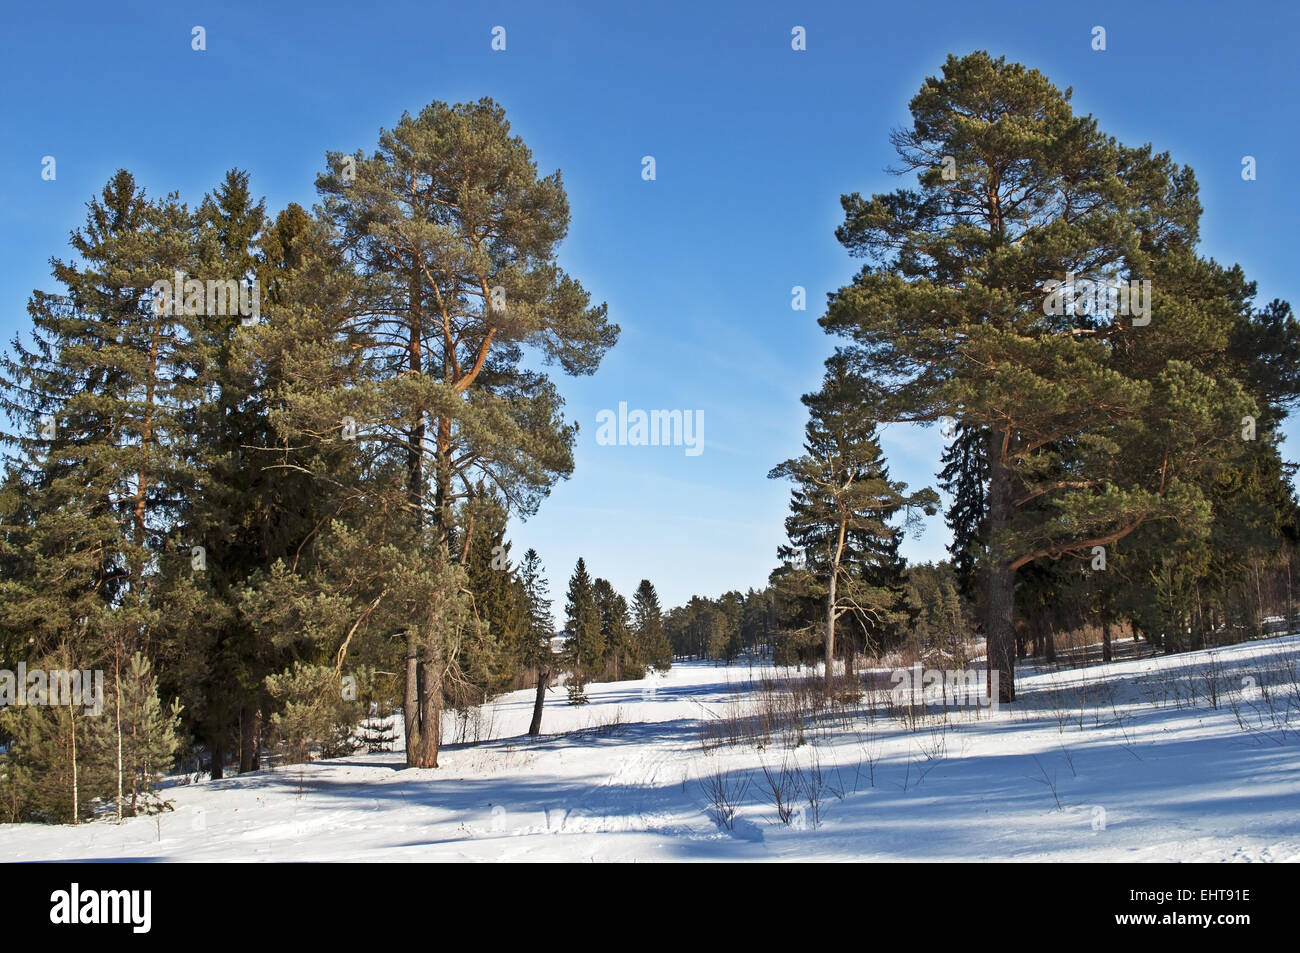 Pine trees in winter time Stock Photo